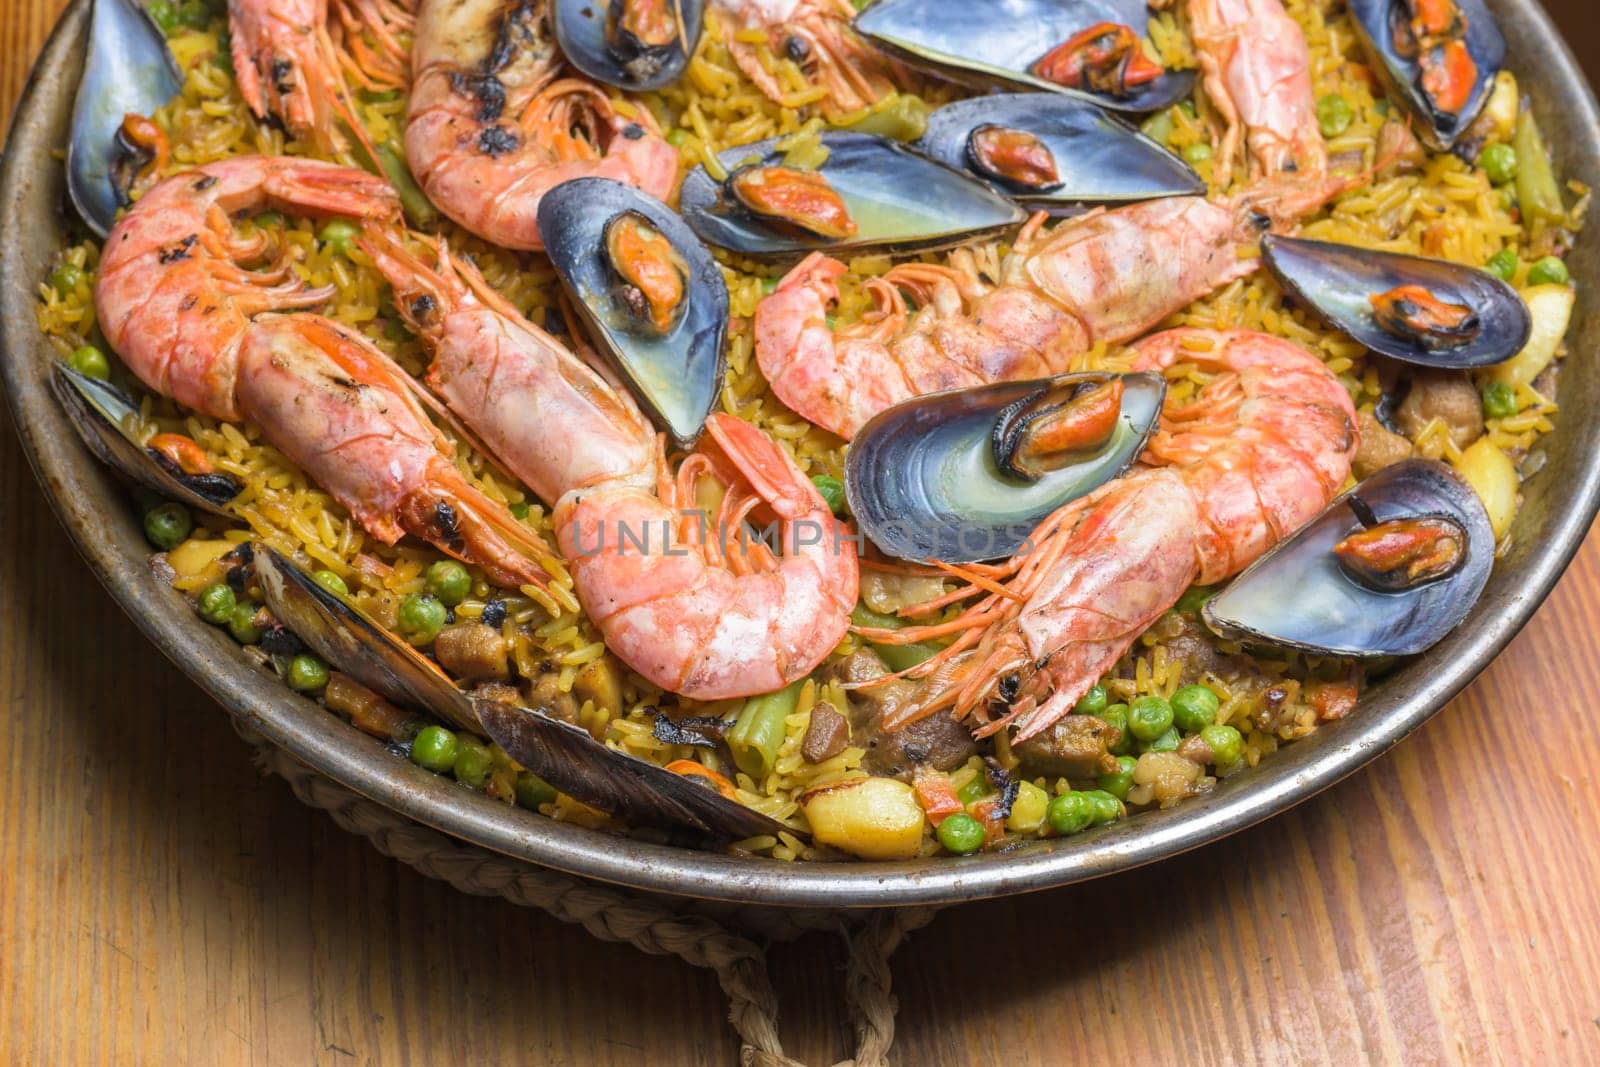 Brightly colored seafood paella presented in a traditional pan, typical Spanish cuisine, Majorca, Balearic Islands, Spain,